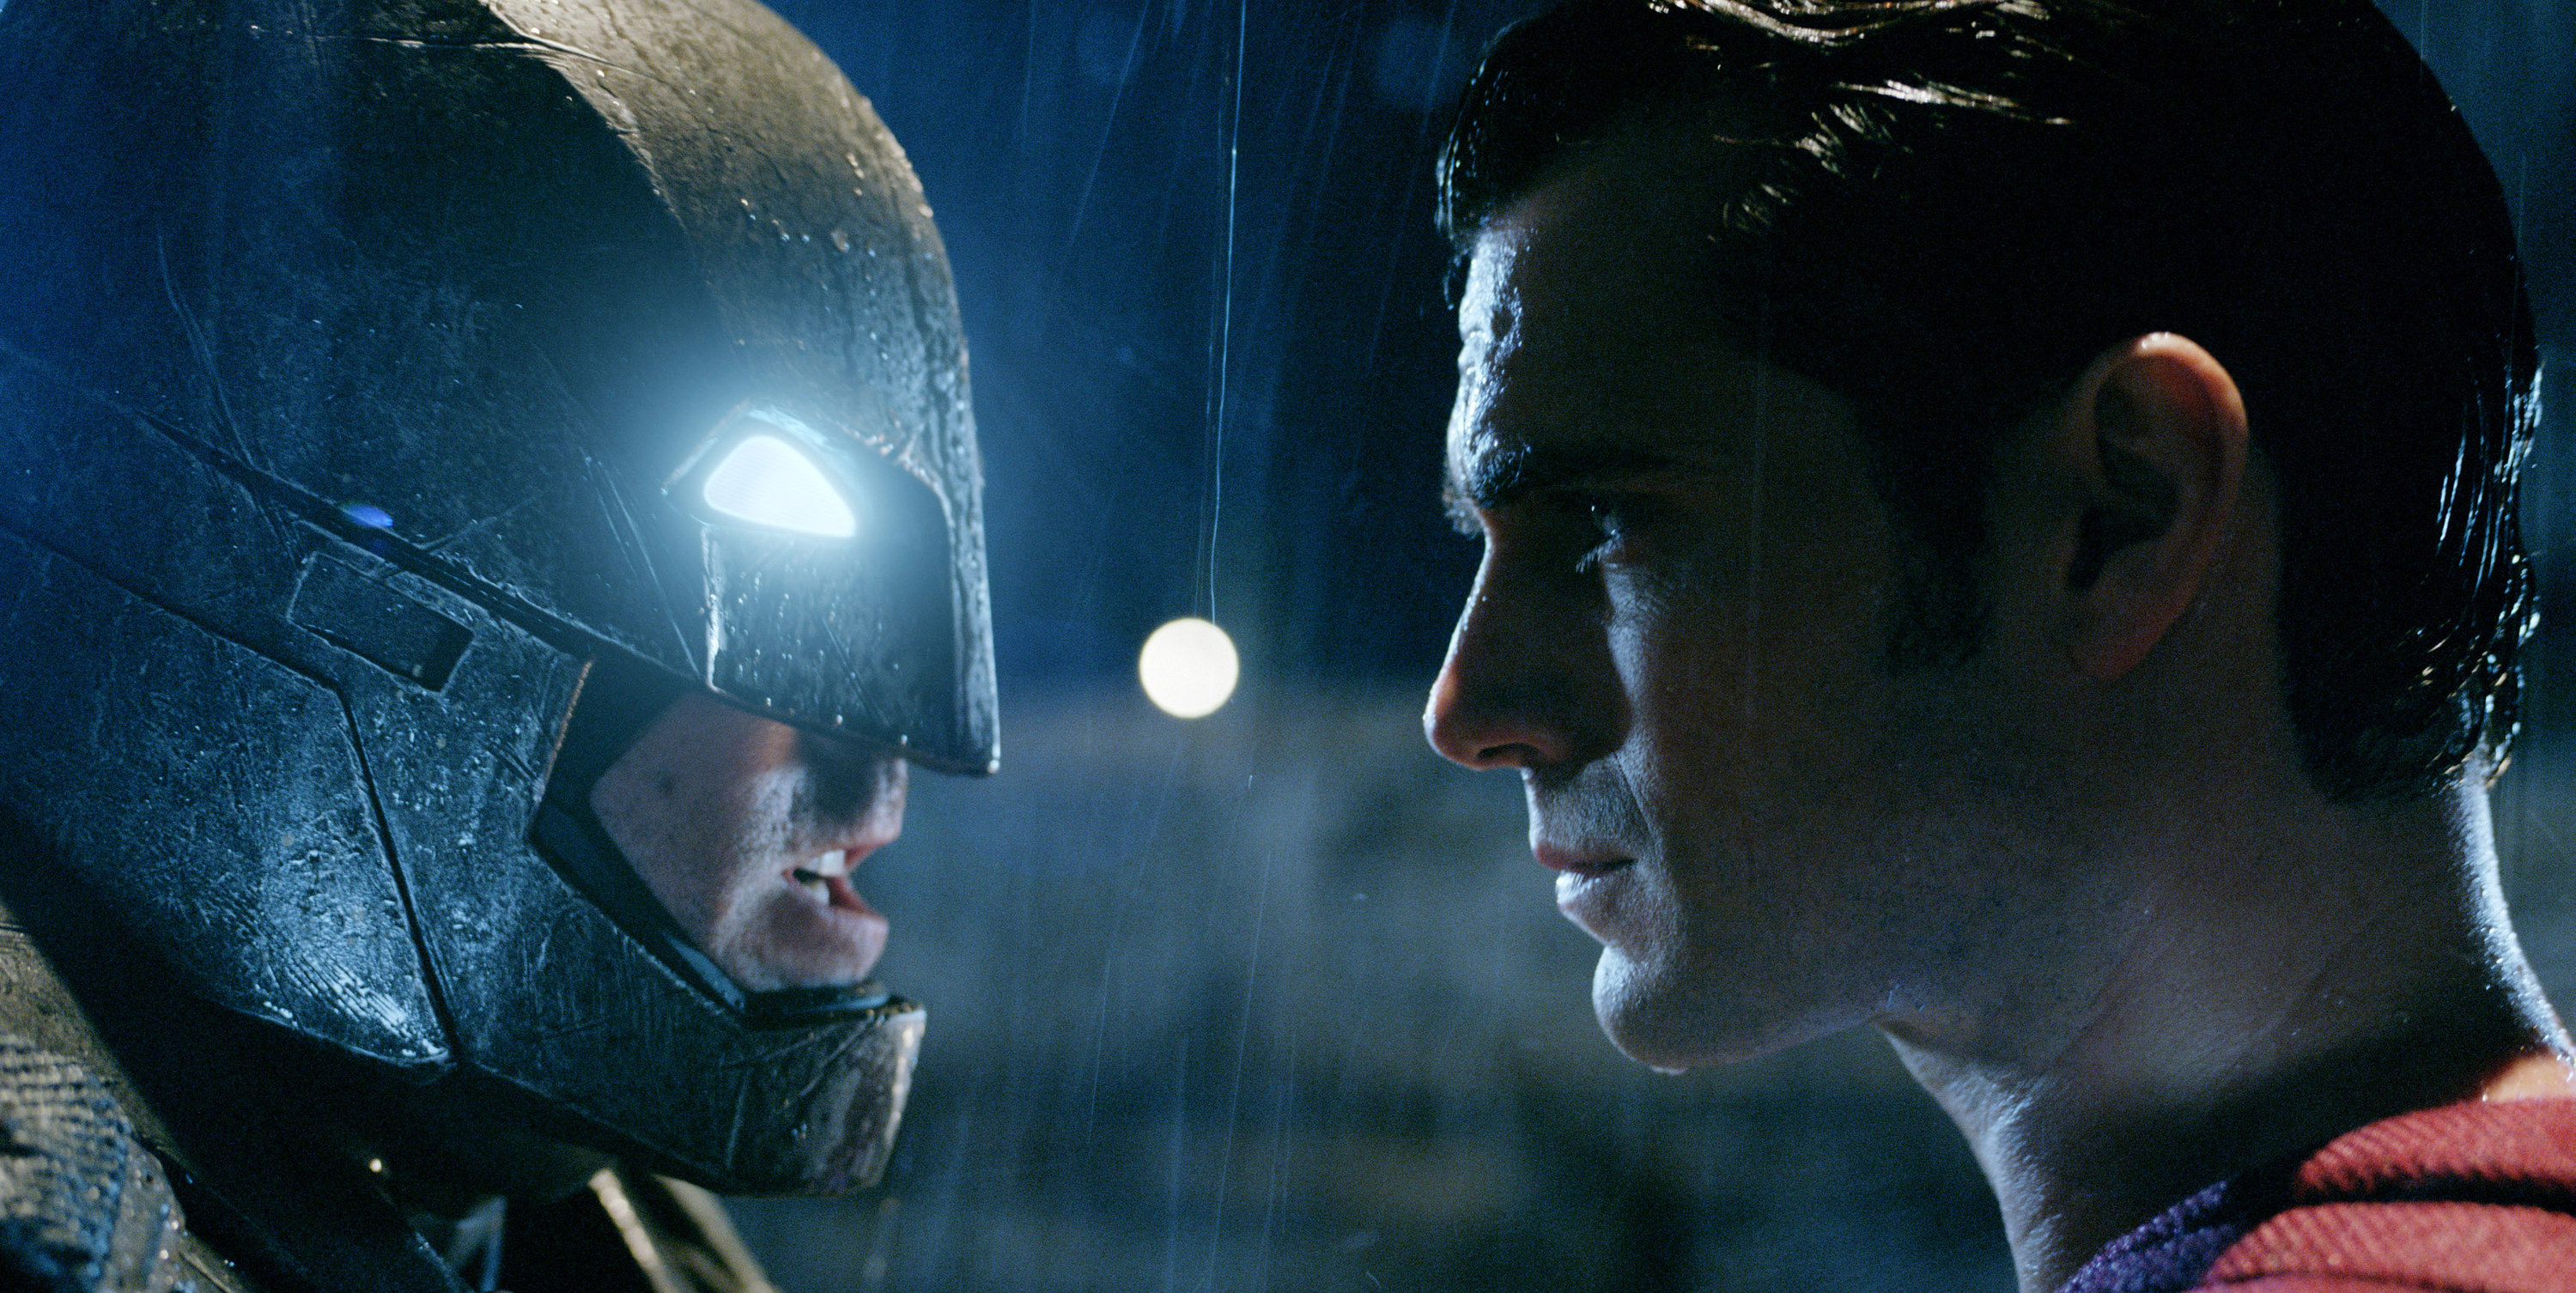 Batman and Superman glaring at each other